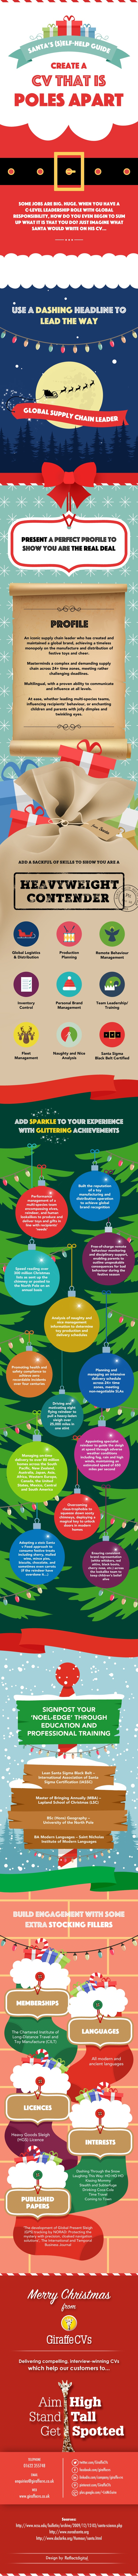 Santa’s Self-Help Guide to Creating Your CV Infographic